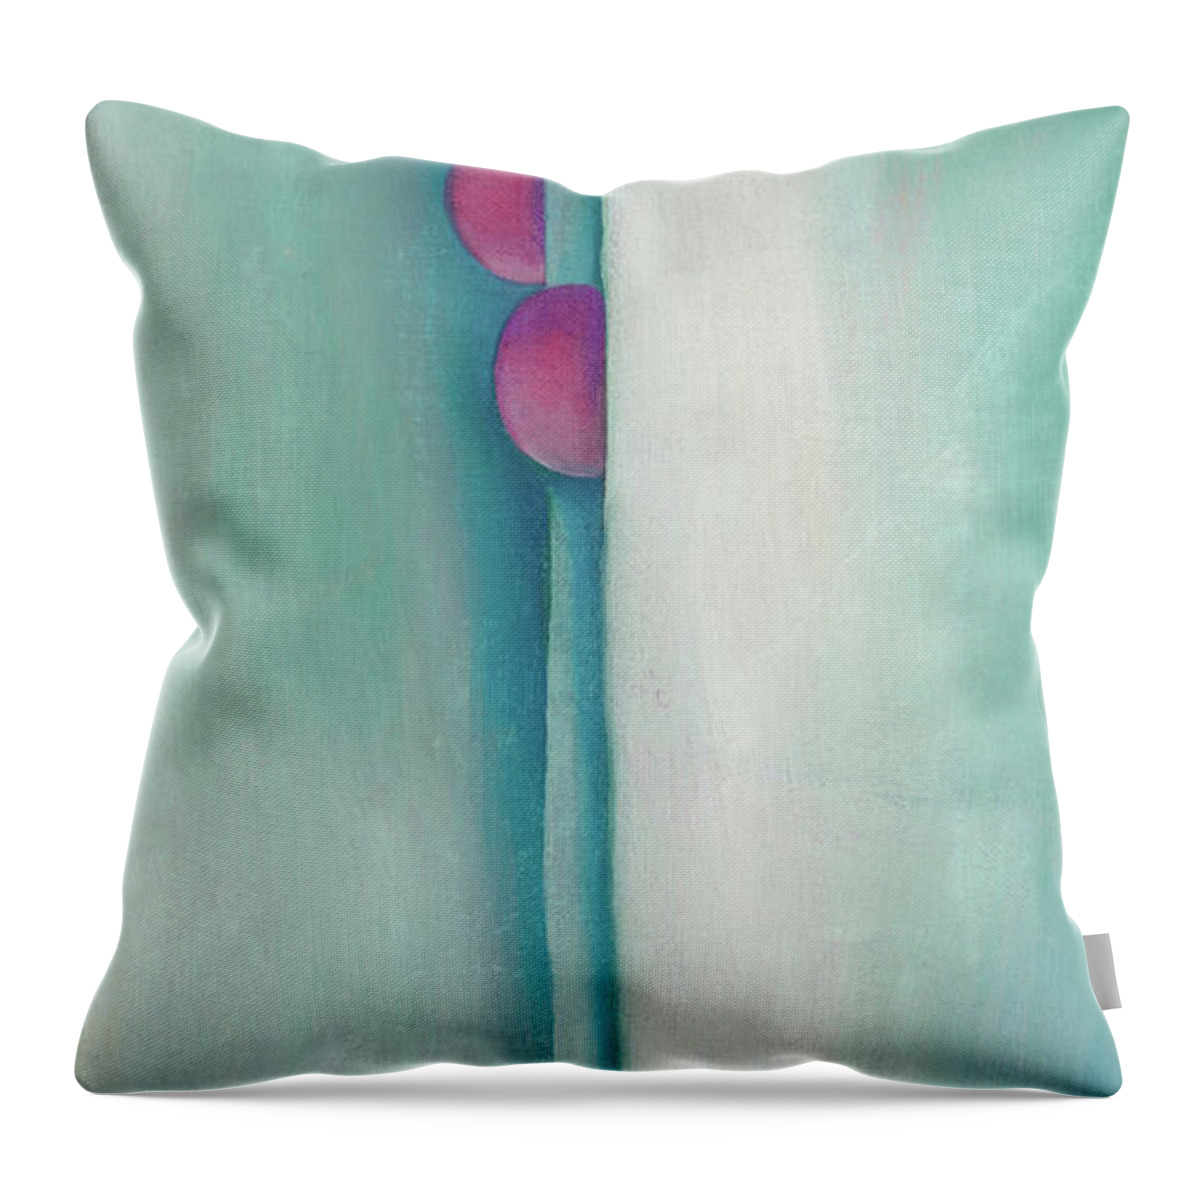 Georgia O'keeffe Throw Pillow featuring the painting Green lines and pink - abstract modernist painting by Georgia O'Keeffe